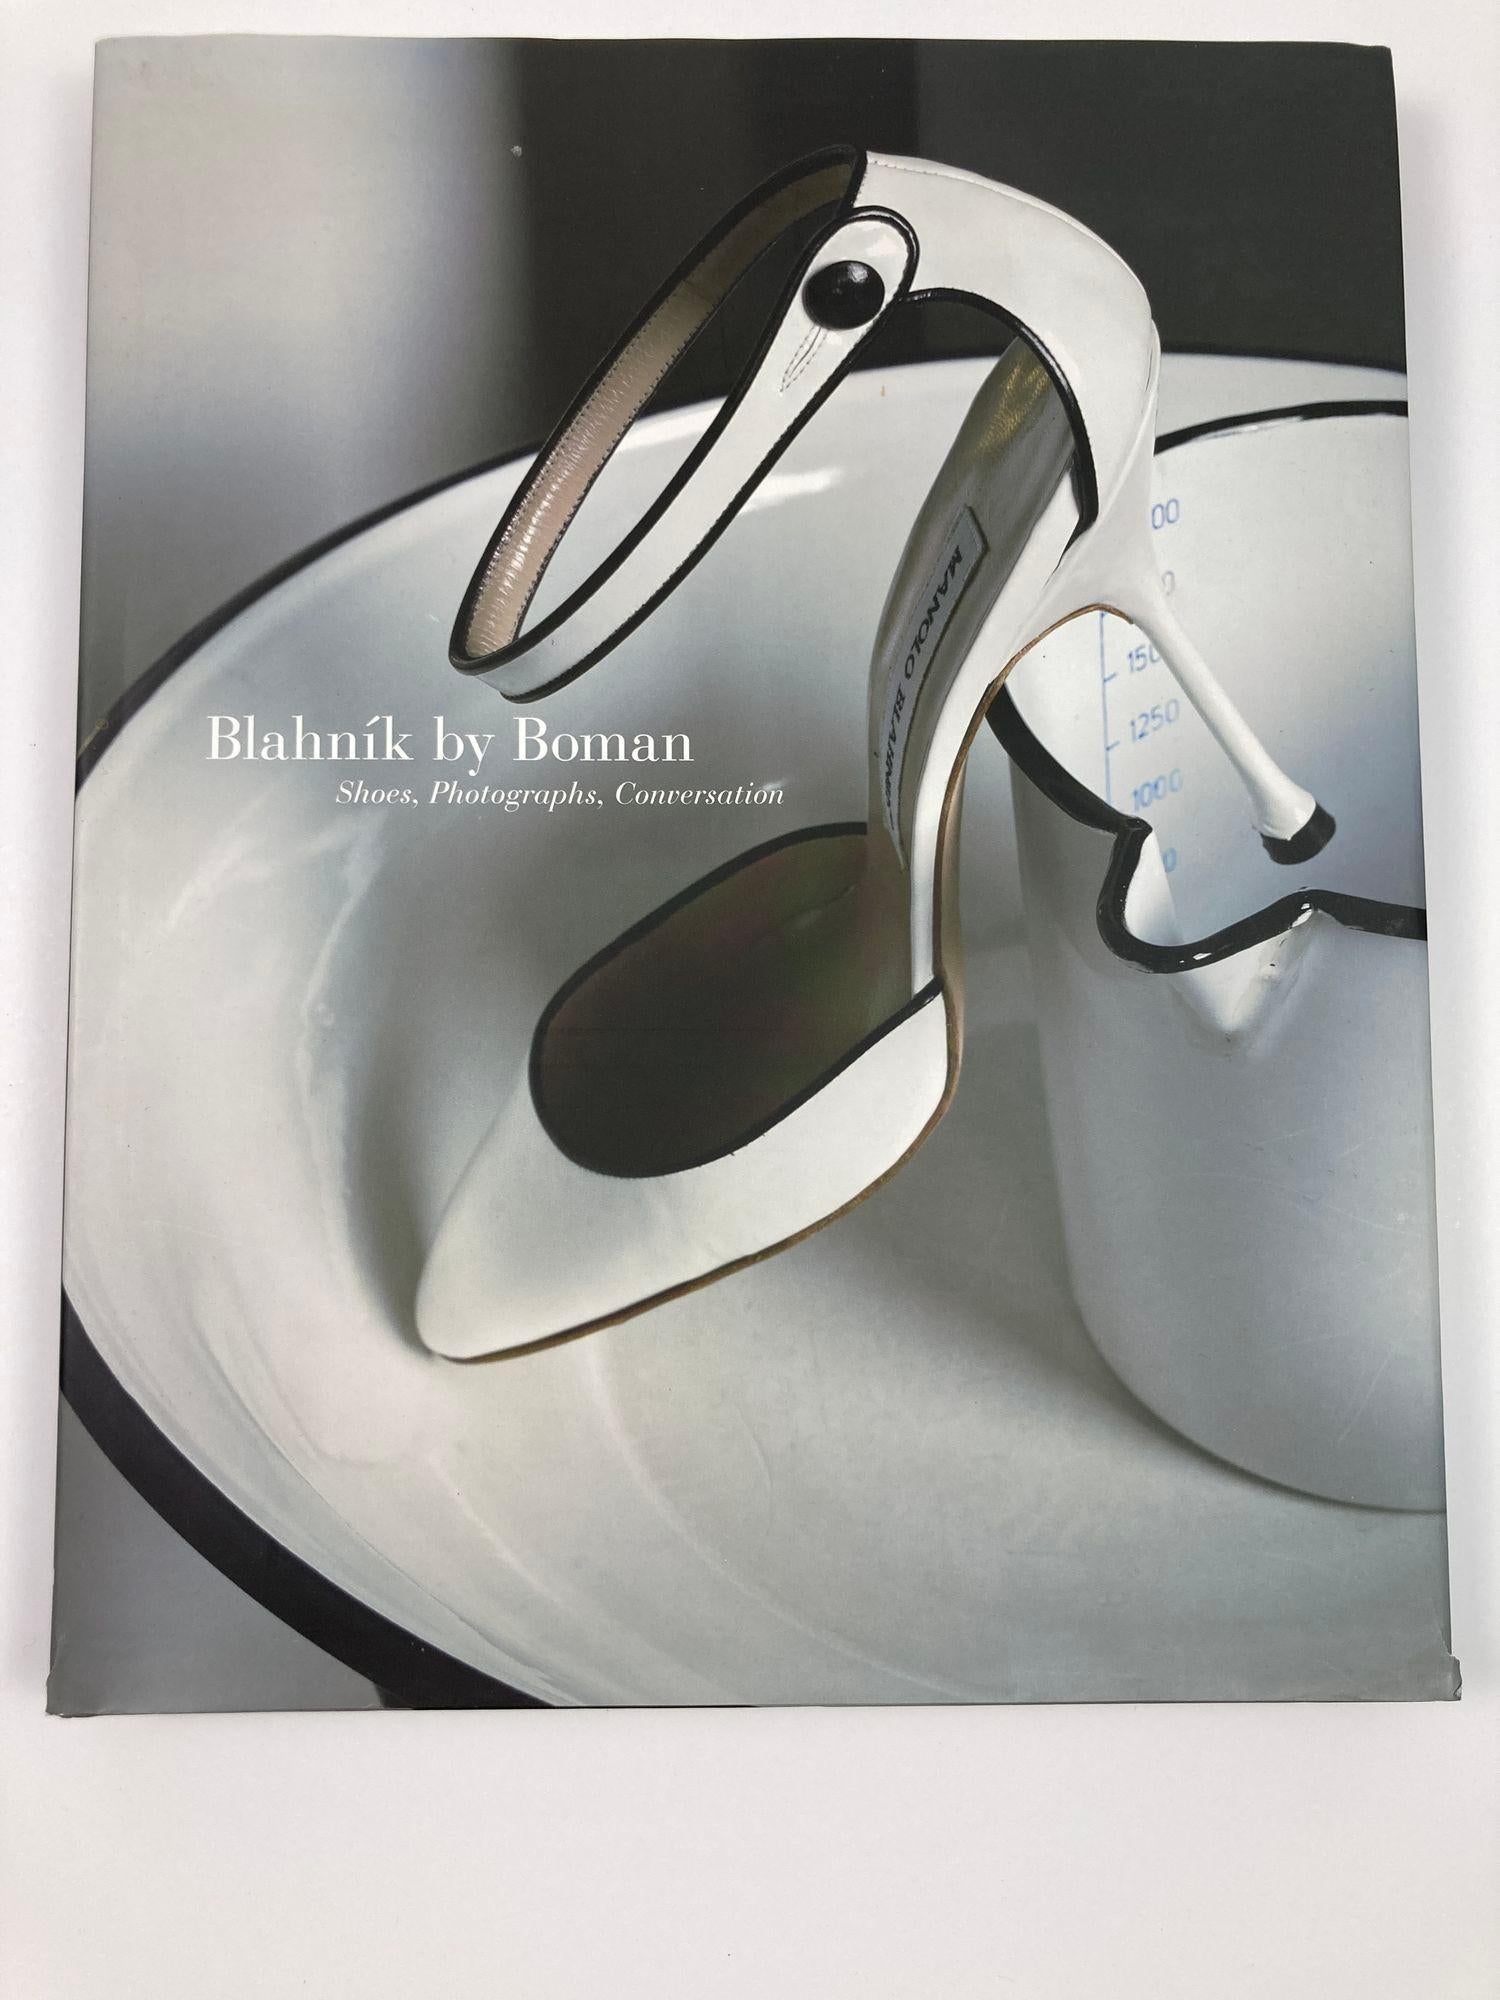 Blahnik by Boman: Shoes, Photographs, ConversationLarge Coffee Table Book.
Manolo Blahnik Chronicle Books, Oct 13, 2005 - Design - 224 pages
Hardcover book, titled Blahnik by Boman: Shoes, Photographs, Conversation, published by Chronicle Books in